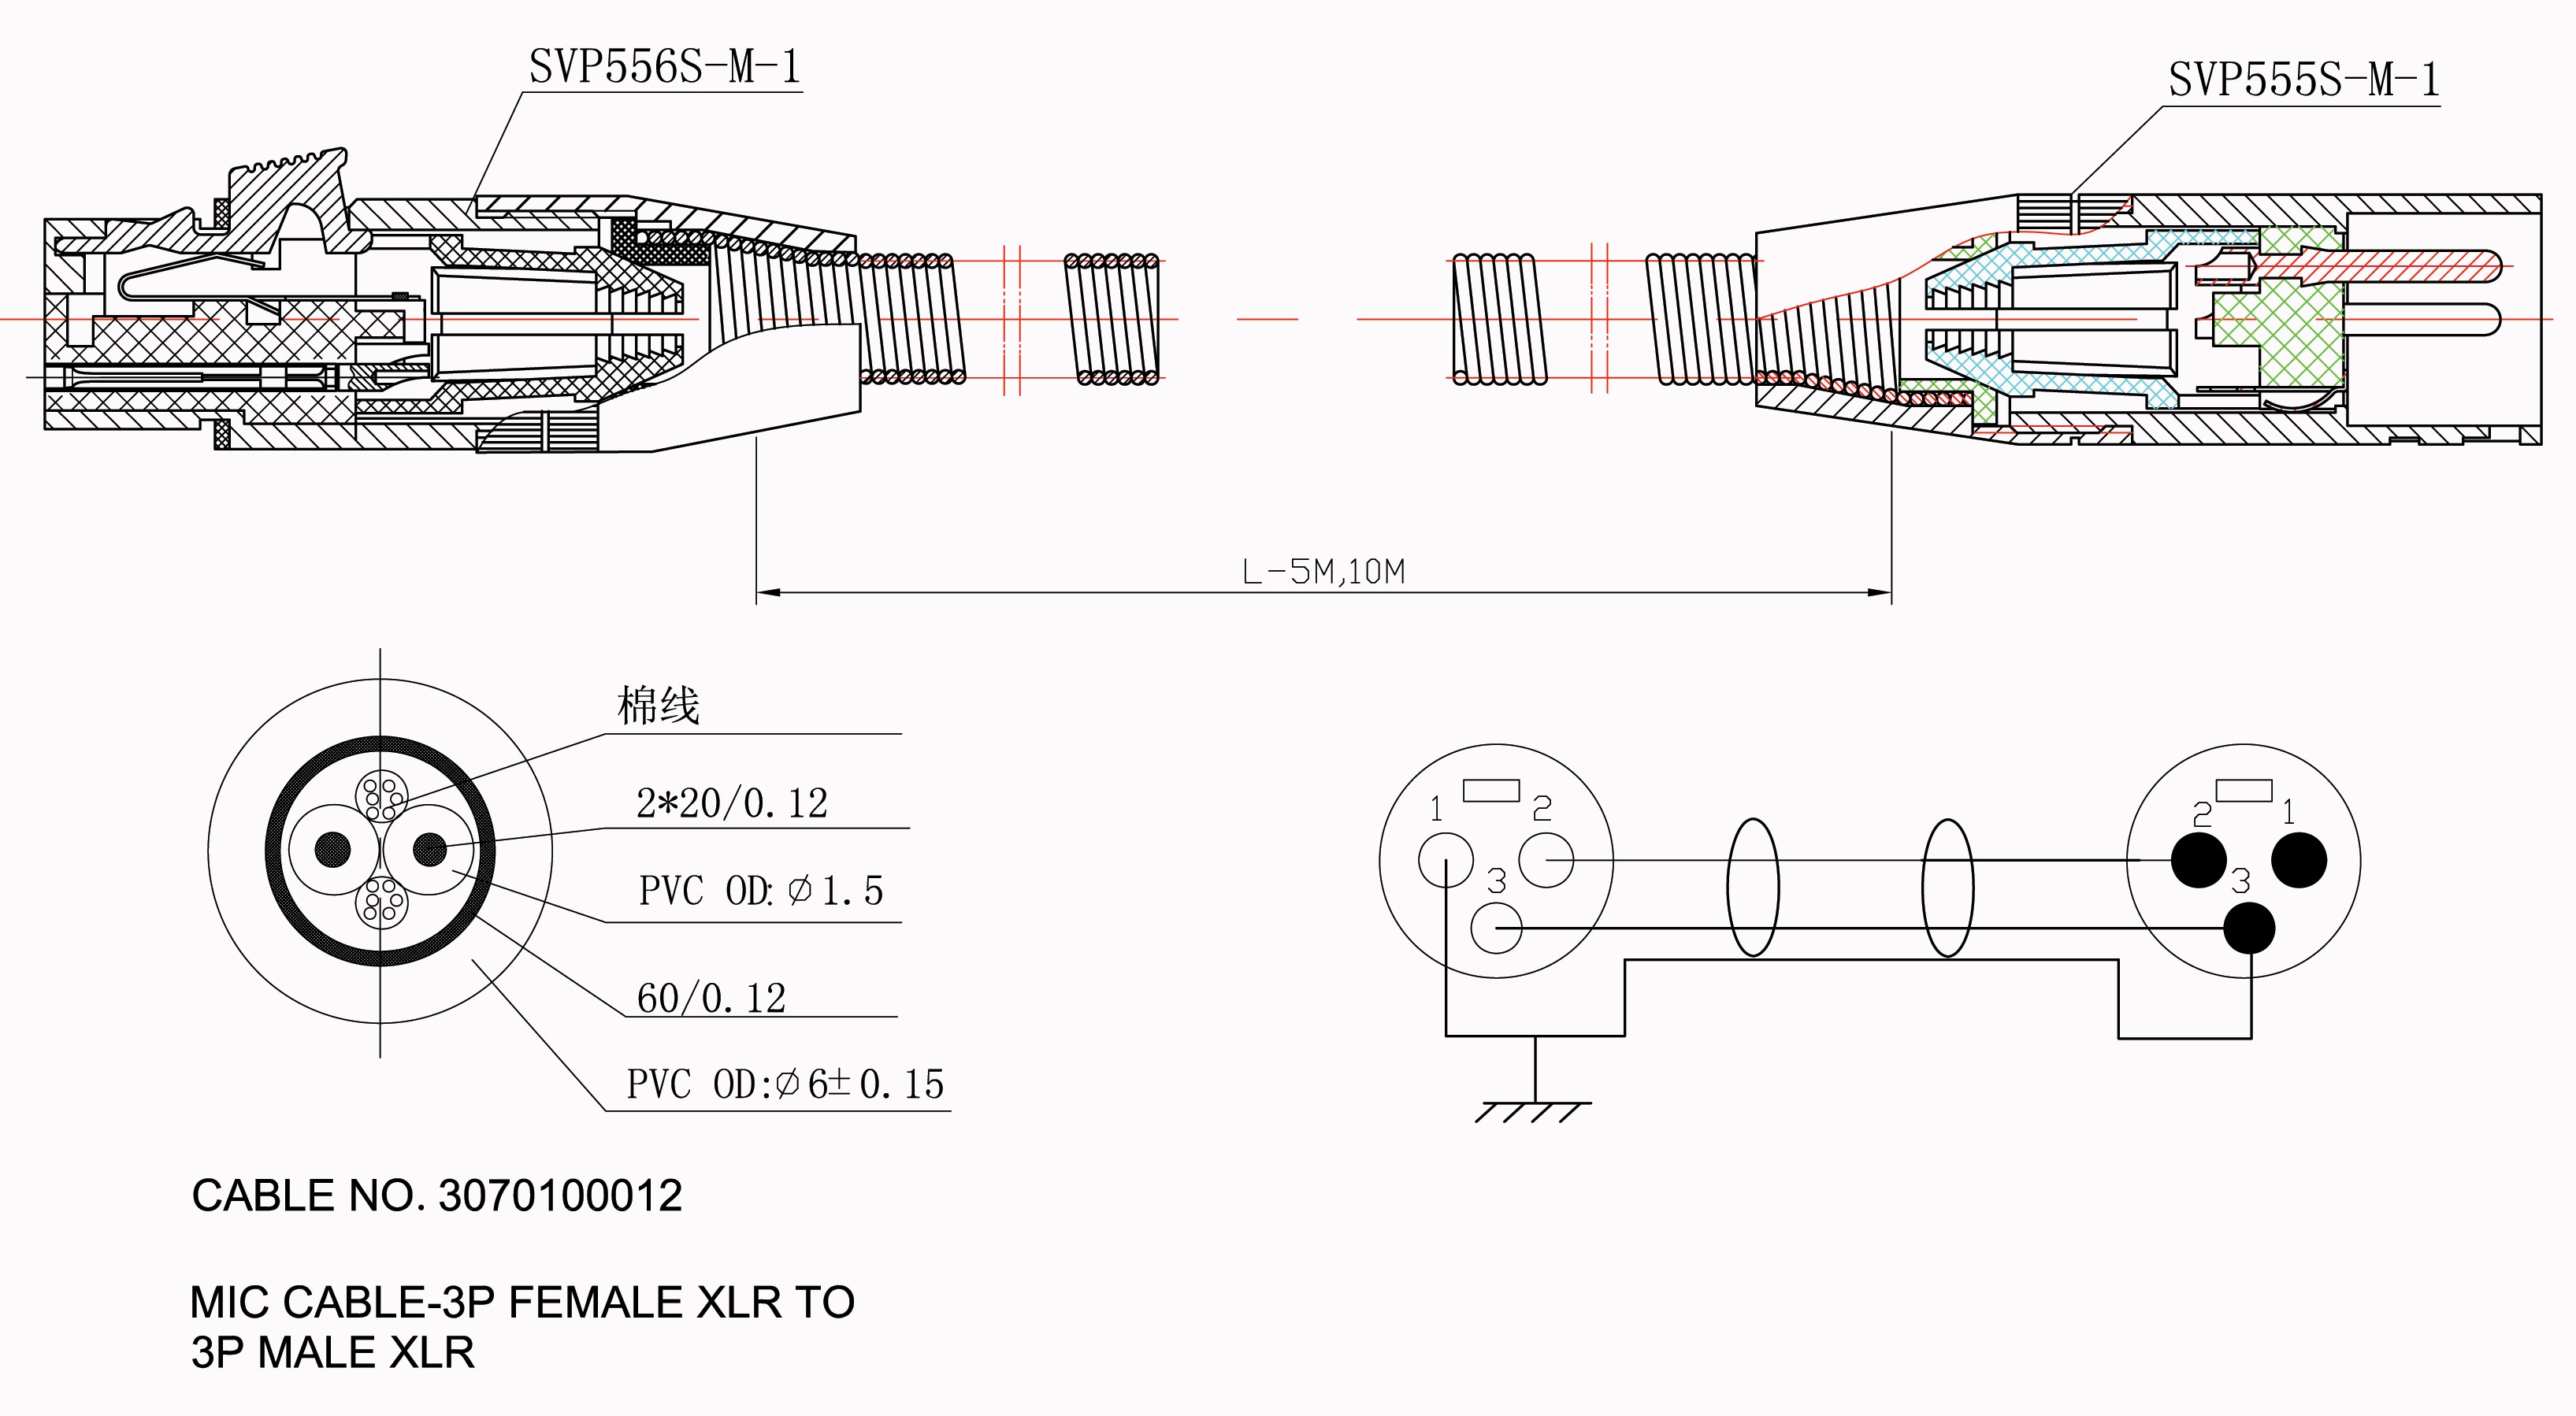 Pioneer Avic N2 Wiring Diagram Wiring Xlr Connectors Diagram Fresh to Rca Cable Beauteous Connector Of Pioneer Avic N2 Wiring Diagram